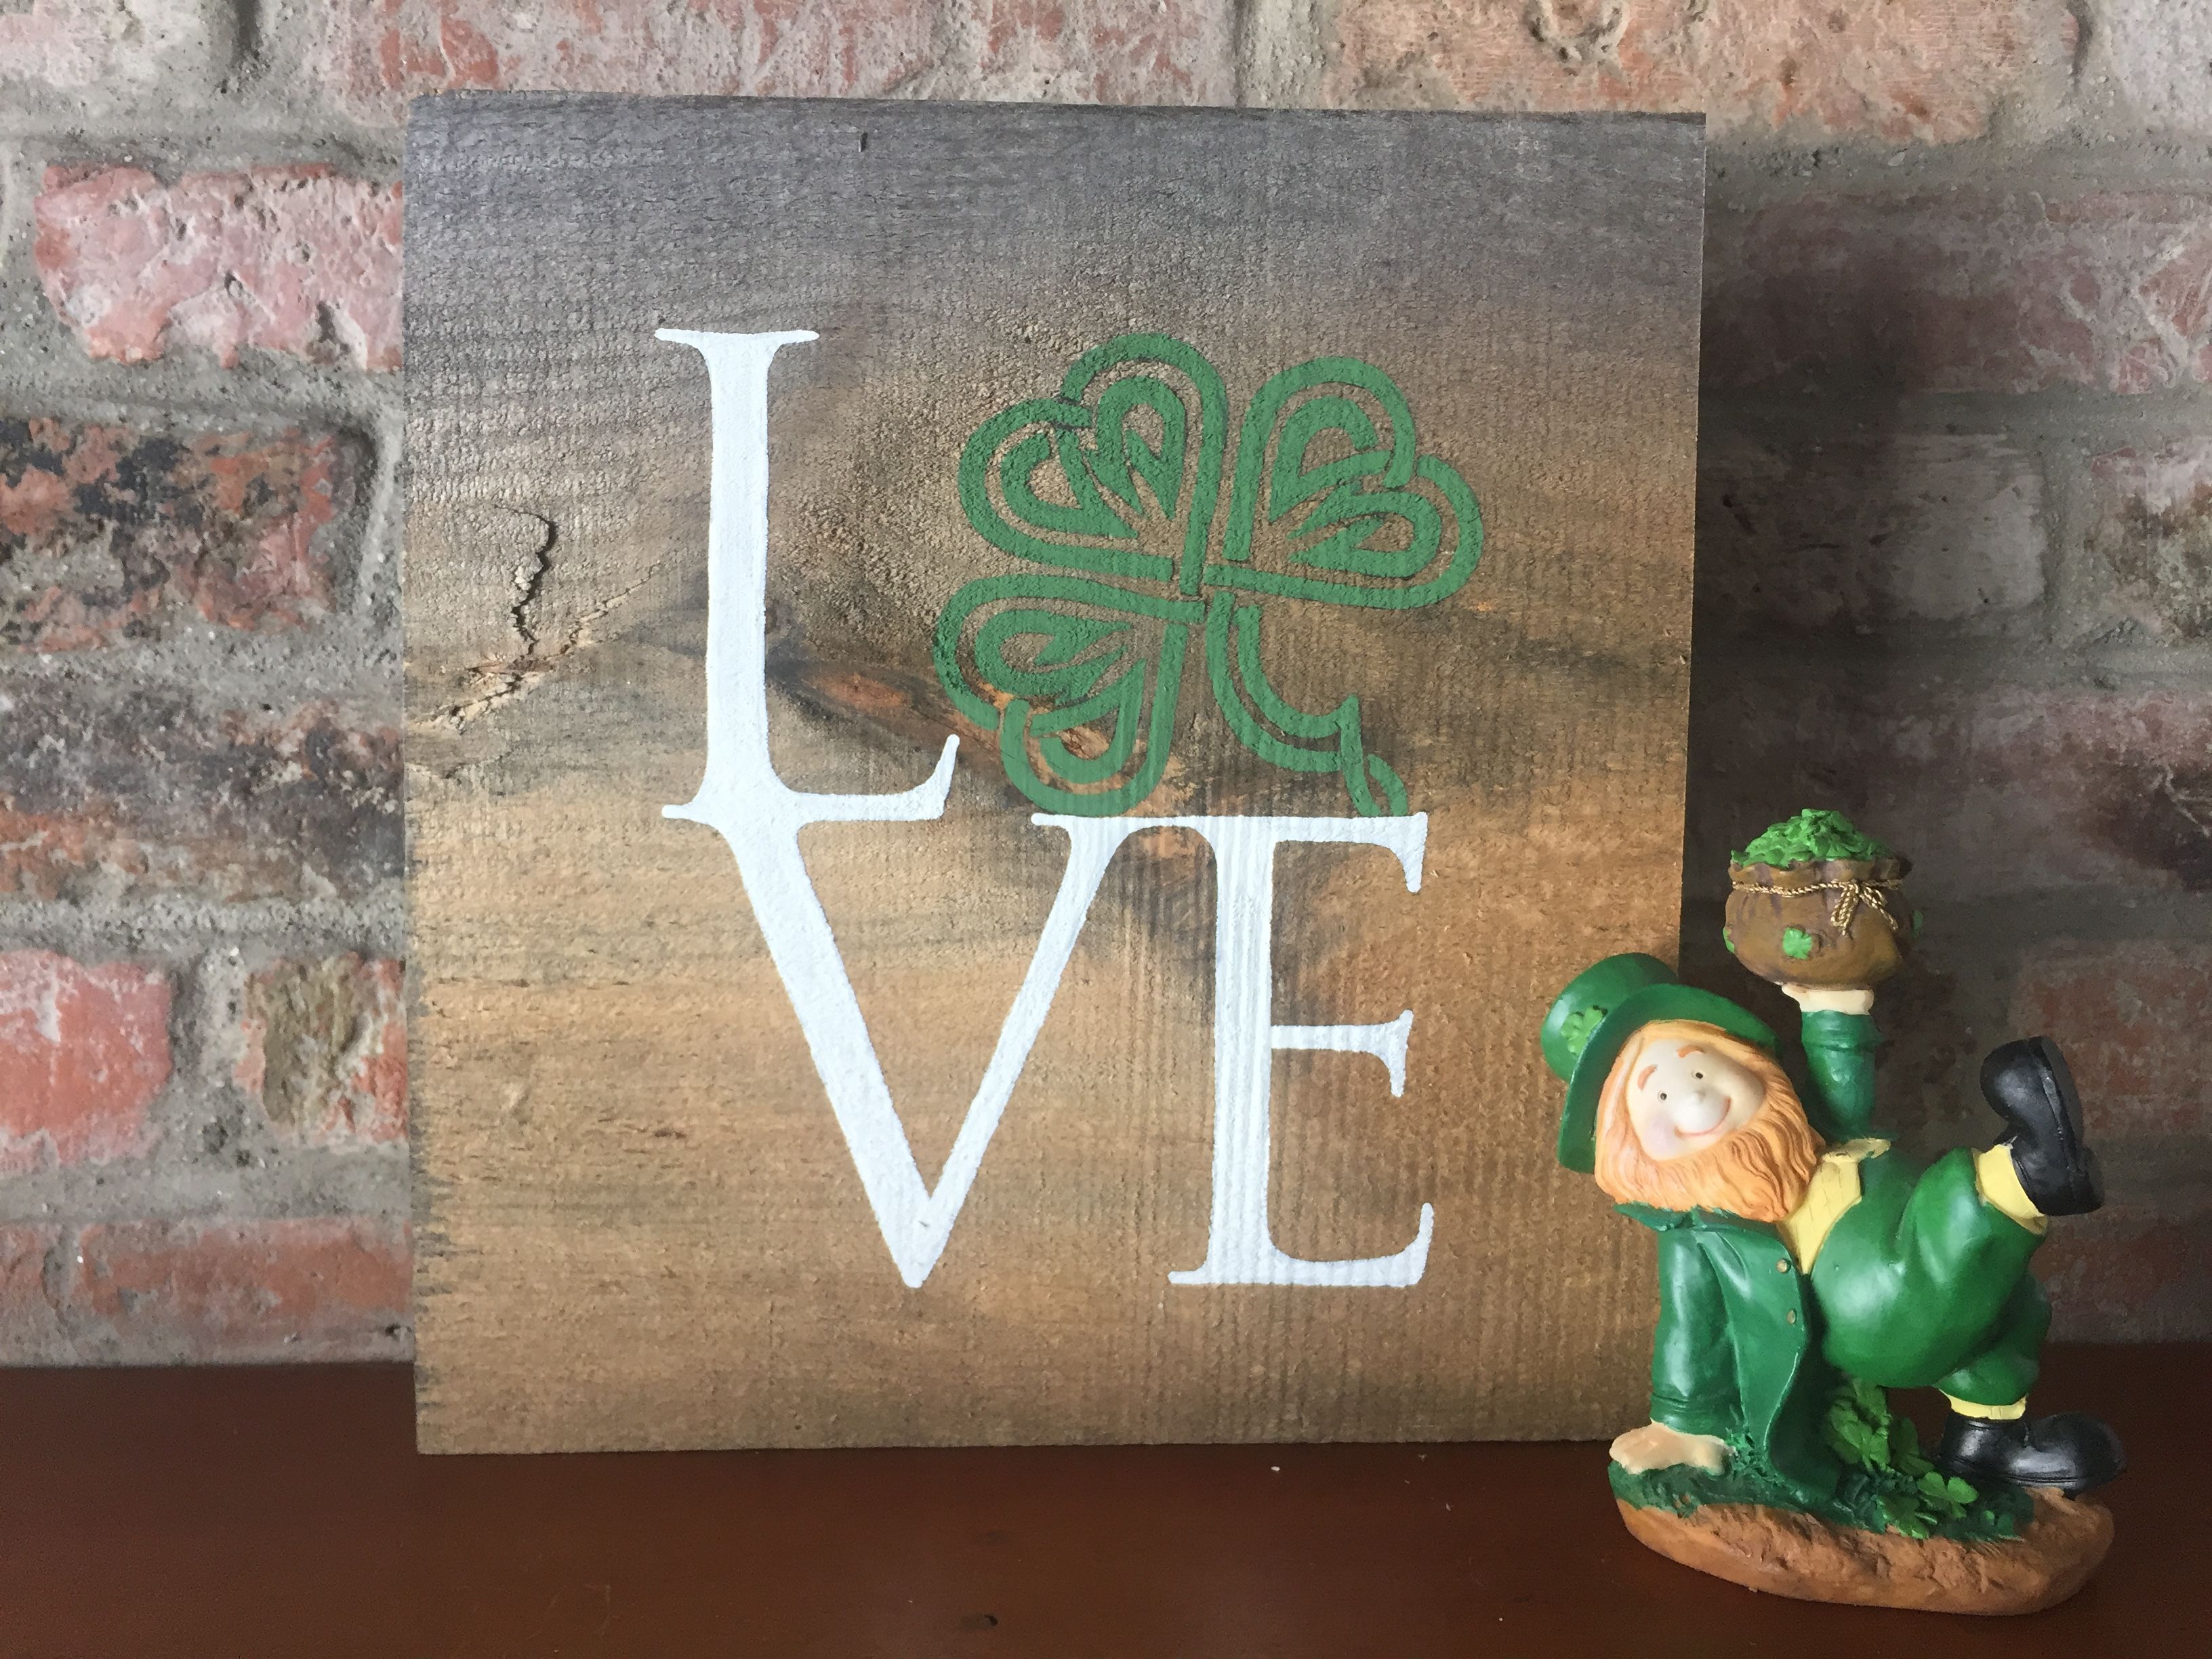 On to St. Patrick's Day! handcrafted